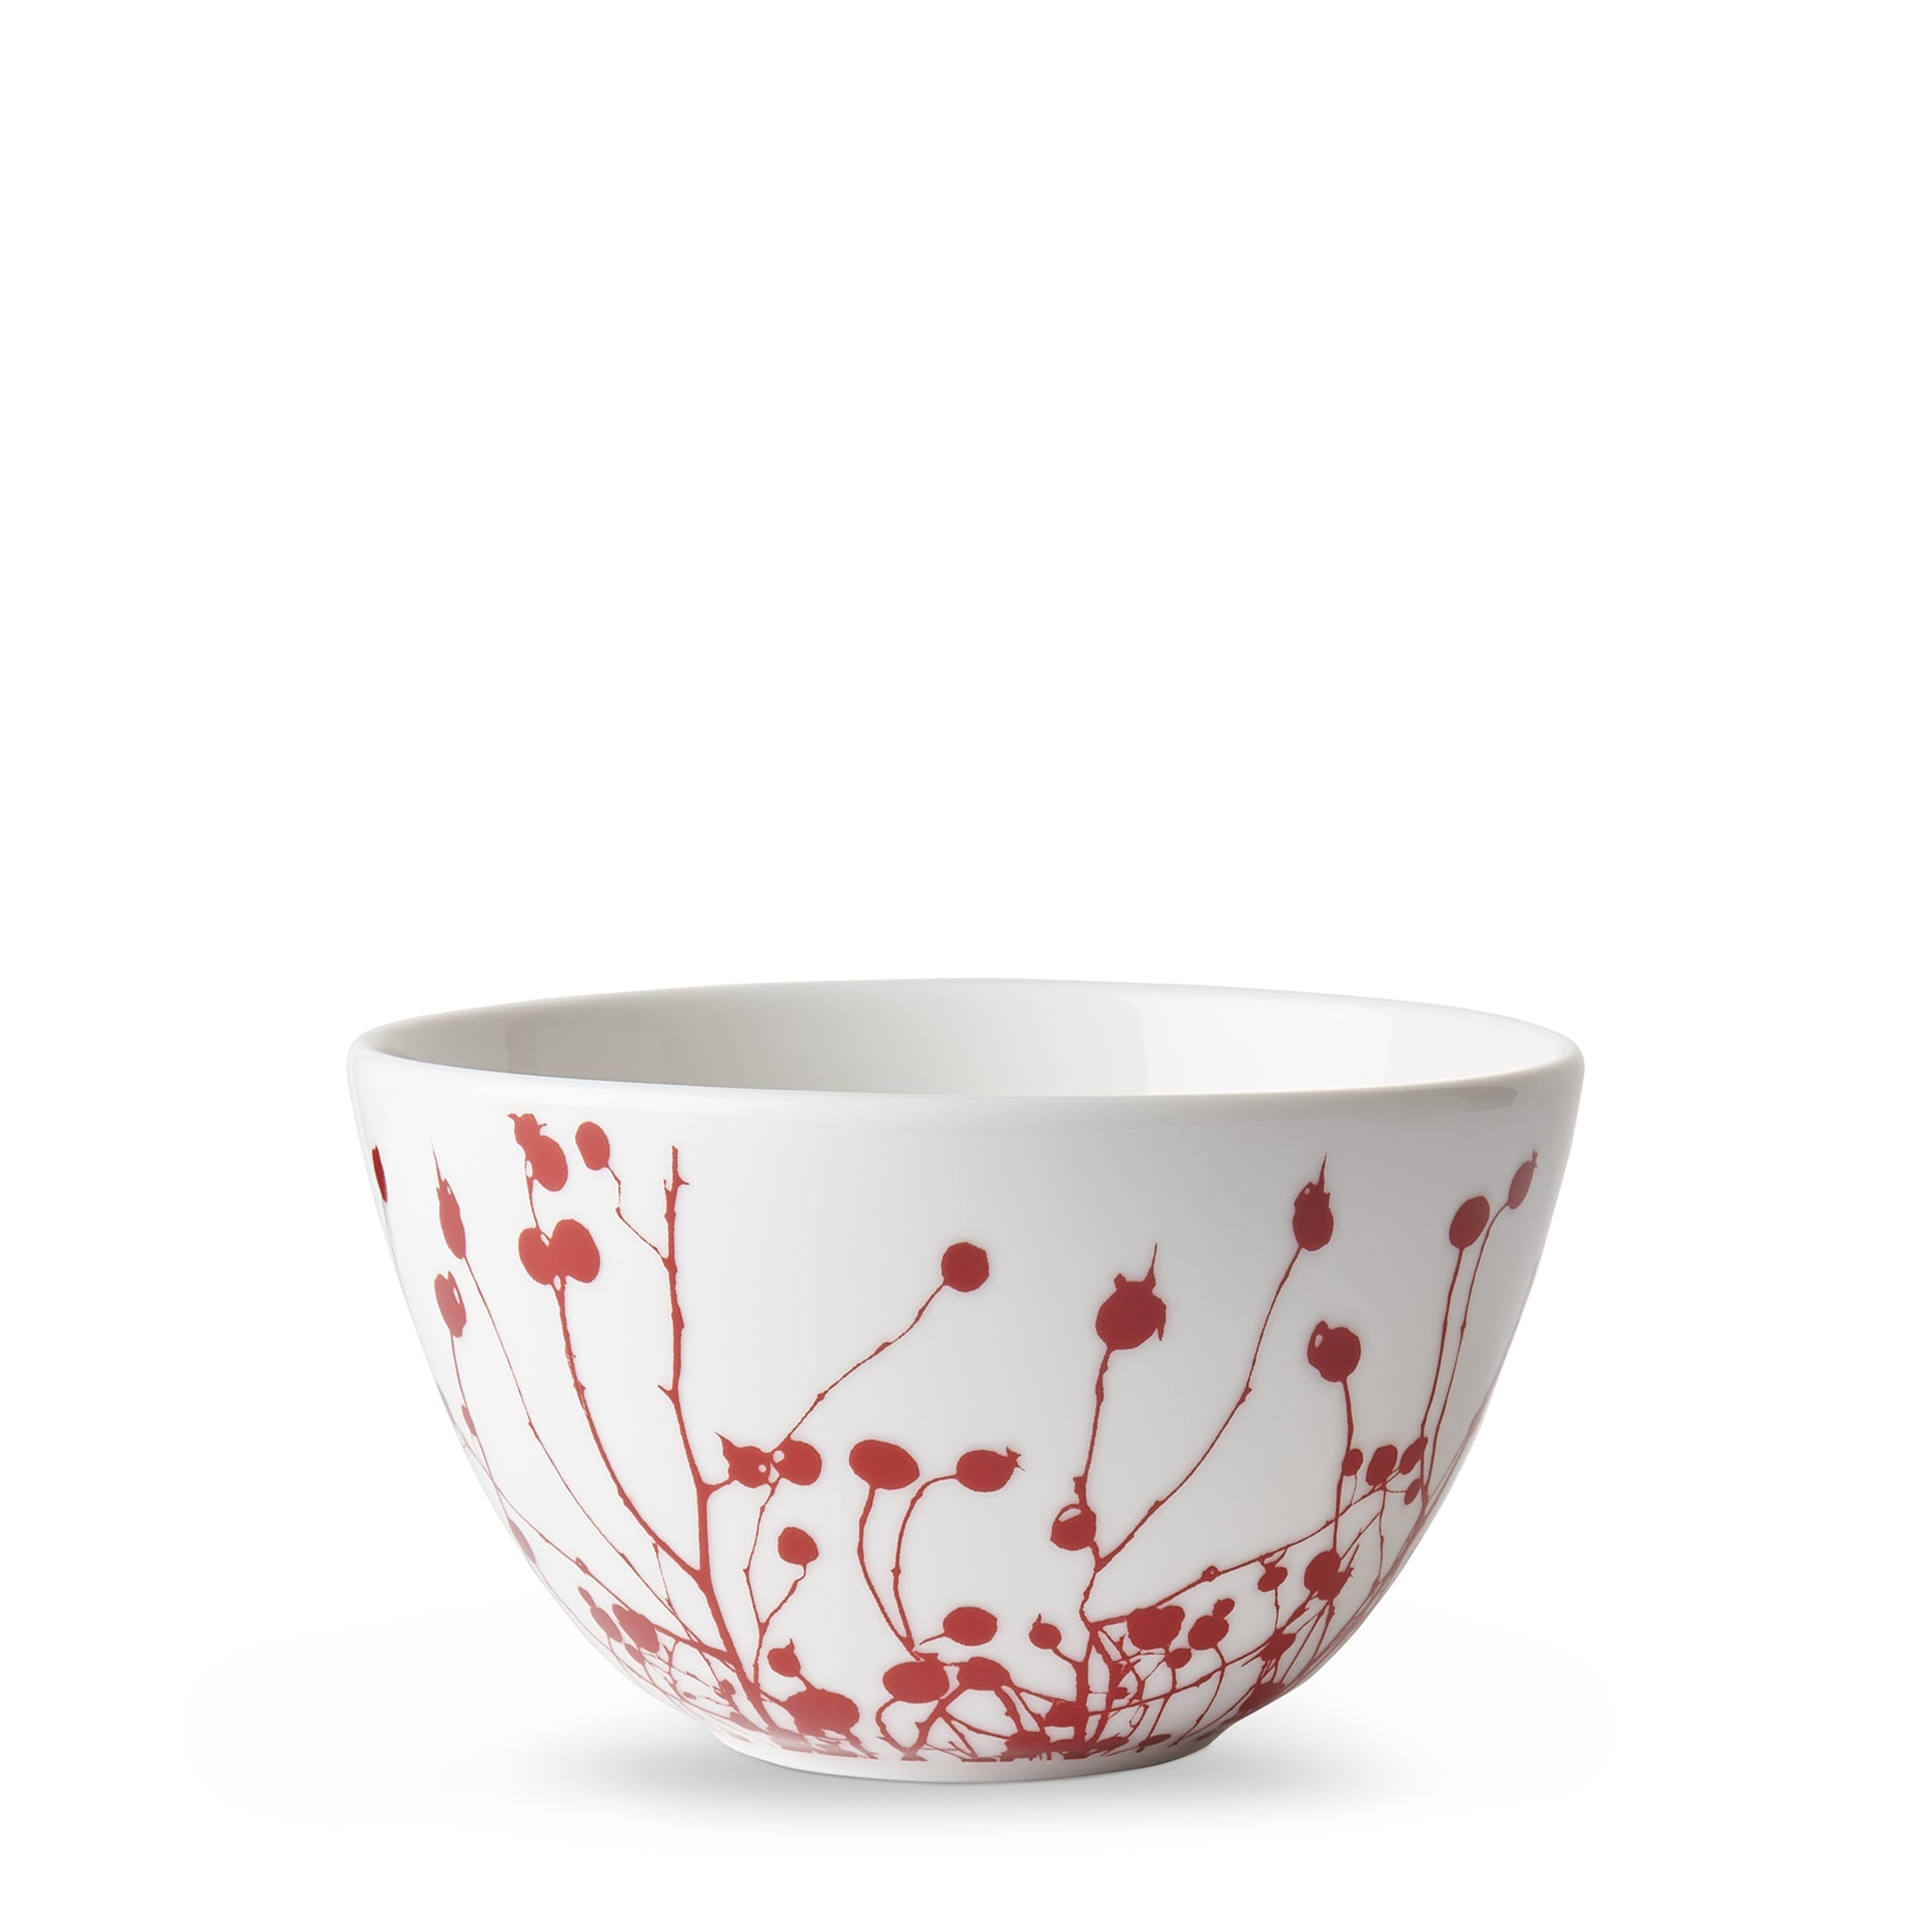 White ceramic bowl with a red abstract floral pattern on the exterior, reminiscent of winter berries. This Winterberries Cereal Bowl by Caskata Artisanal Home is also dishwasher safe for your convenience.